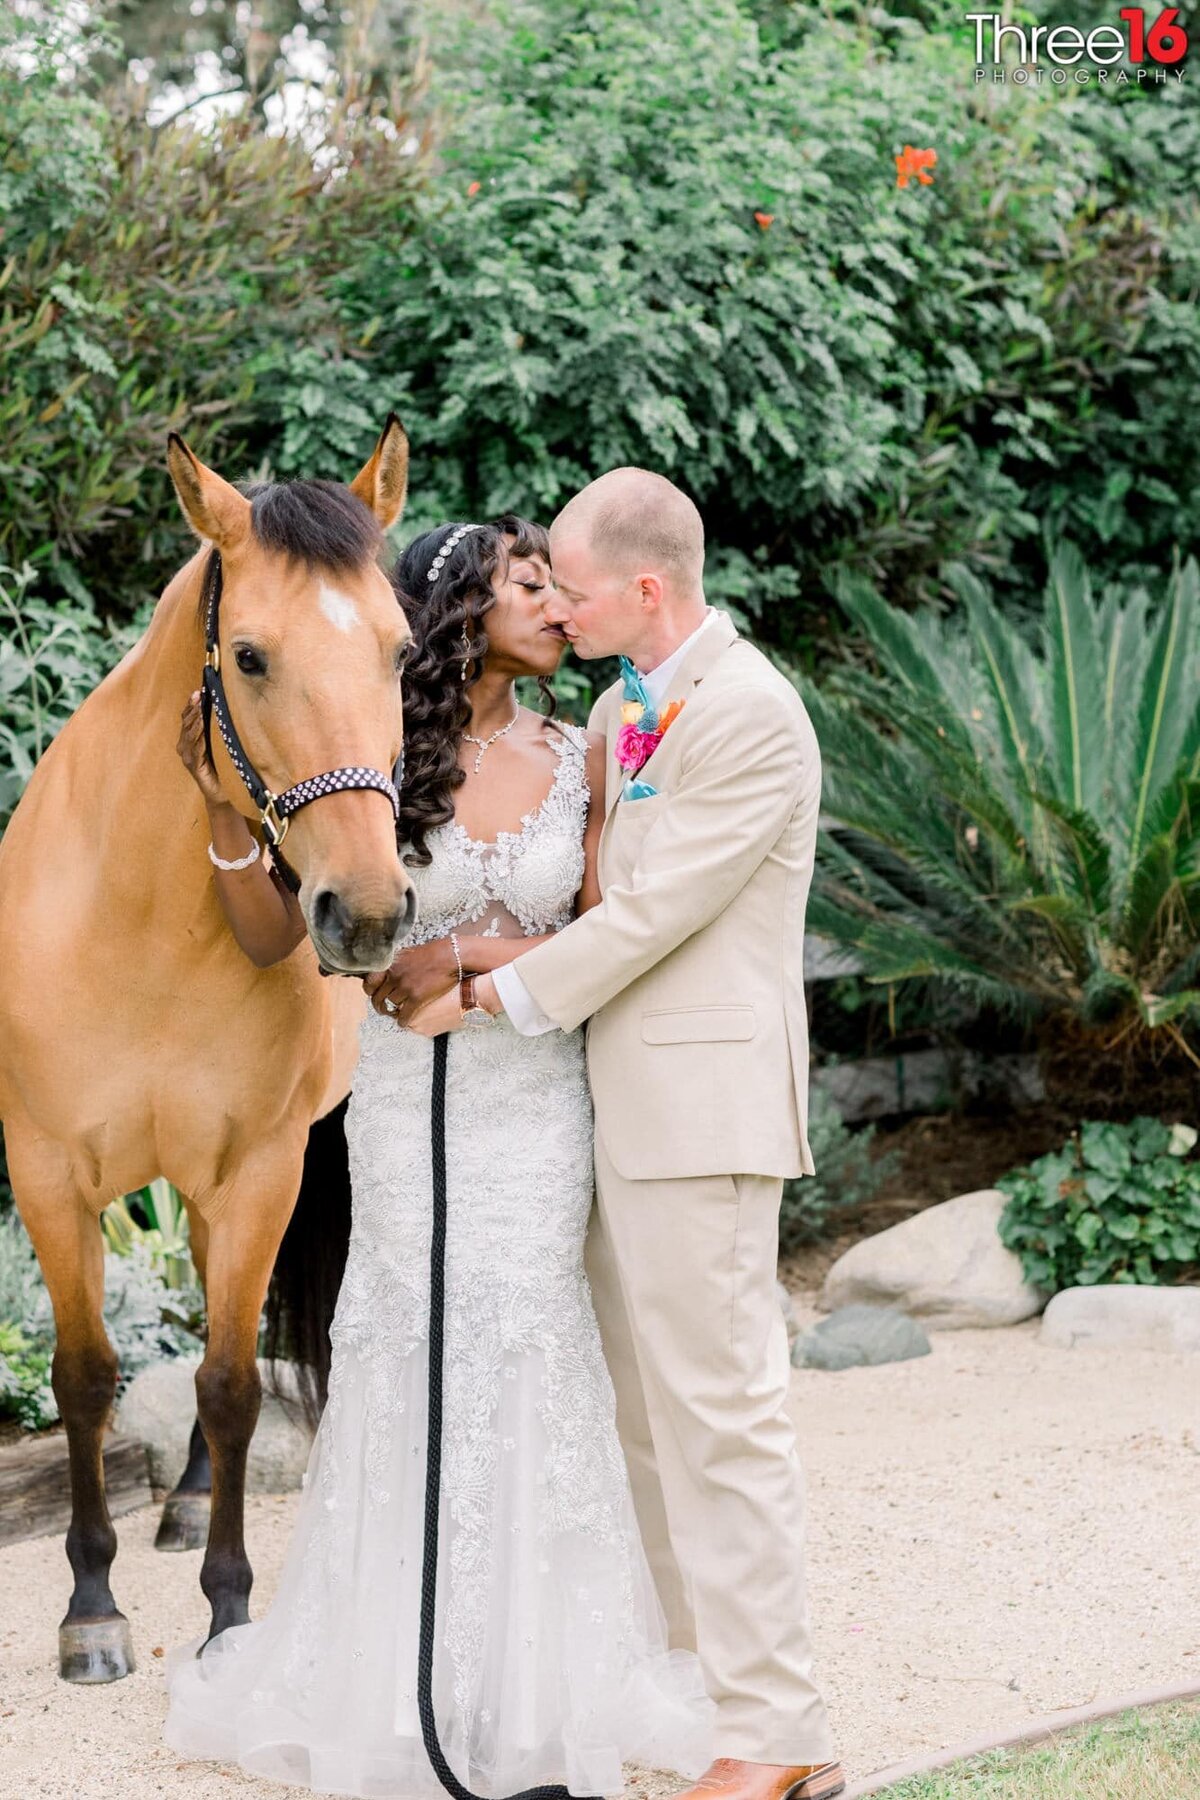 Bride and Groom share a romantic kiss while standing next to a horse